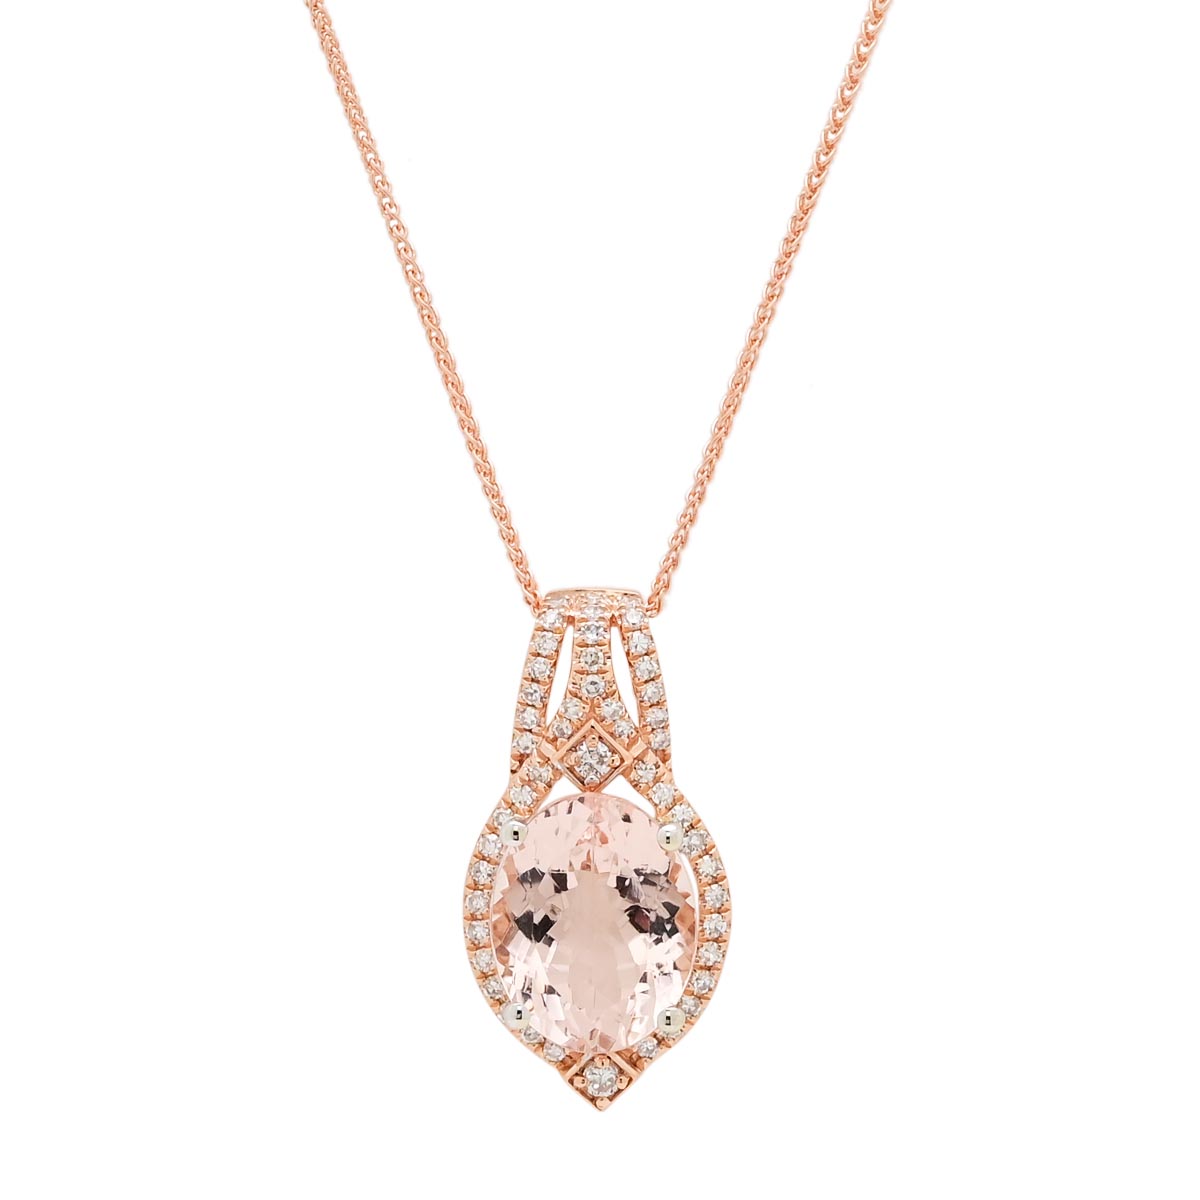 Oval Morganite Necklace in 14kt White and Rose Gold with Diamonds (1/5ct tw)